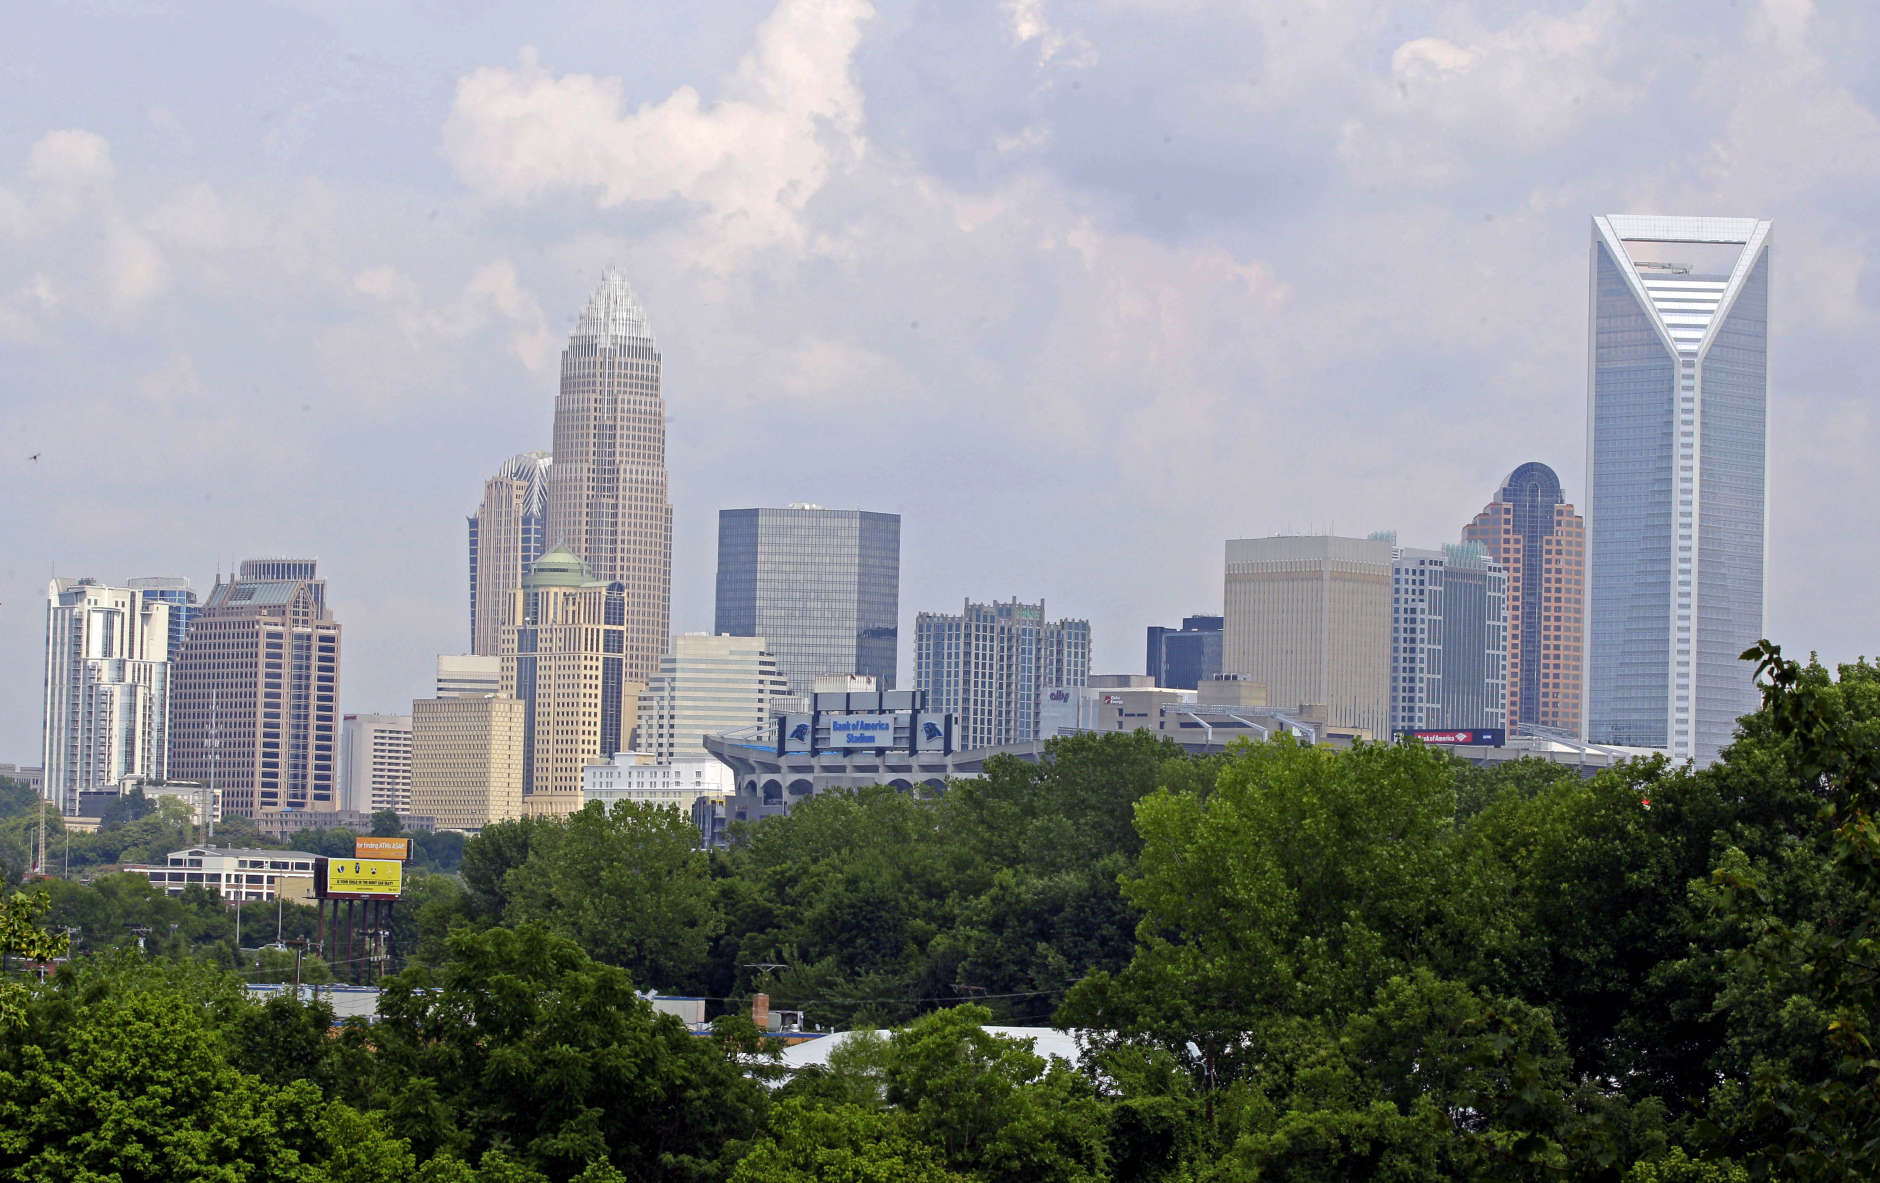 In this July 17, 2012 photo the skyline of Charlotte, N.C., is shown. Much was made about Charlotte emerging on the big stage when Democrats awarded their 2012 national convention to the city last year. But the tidy city of gleaming skyscrapers built with money during the flush years of banking is more in its middle age, trying to reinvent itself without cutting all the ties to its big cash past. (AP Photo/Chuck Burton)